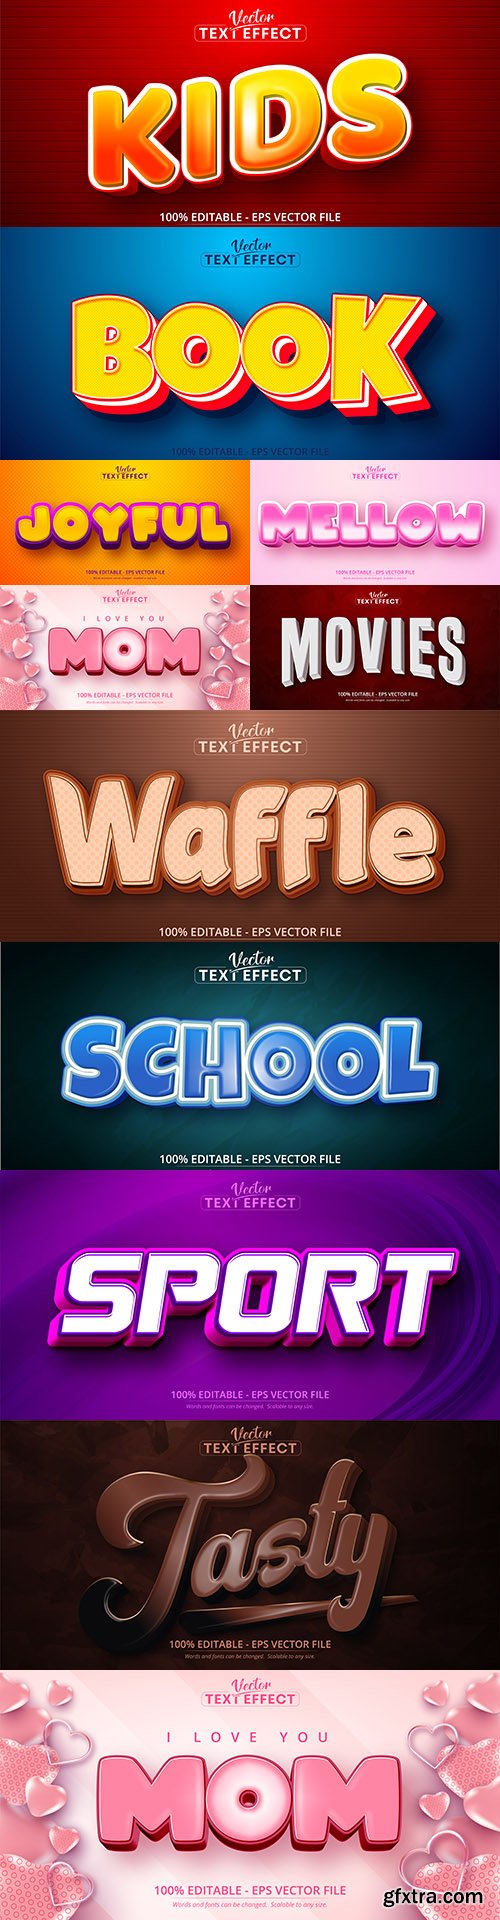 Editable font and 3d effect text design collection illustration 74
